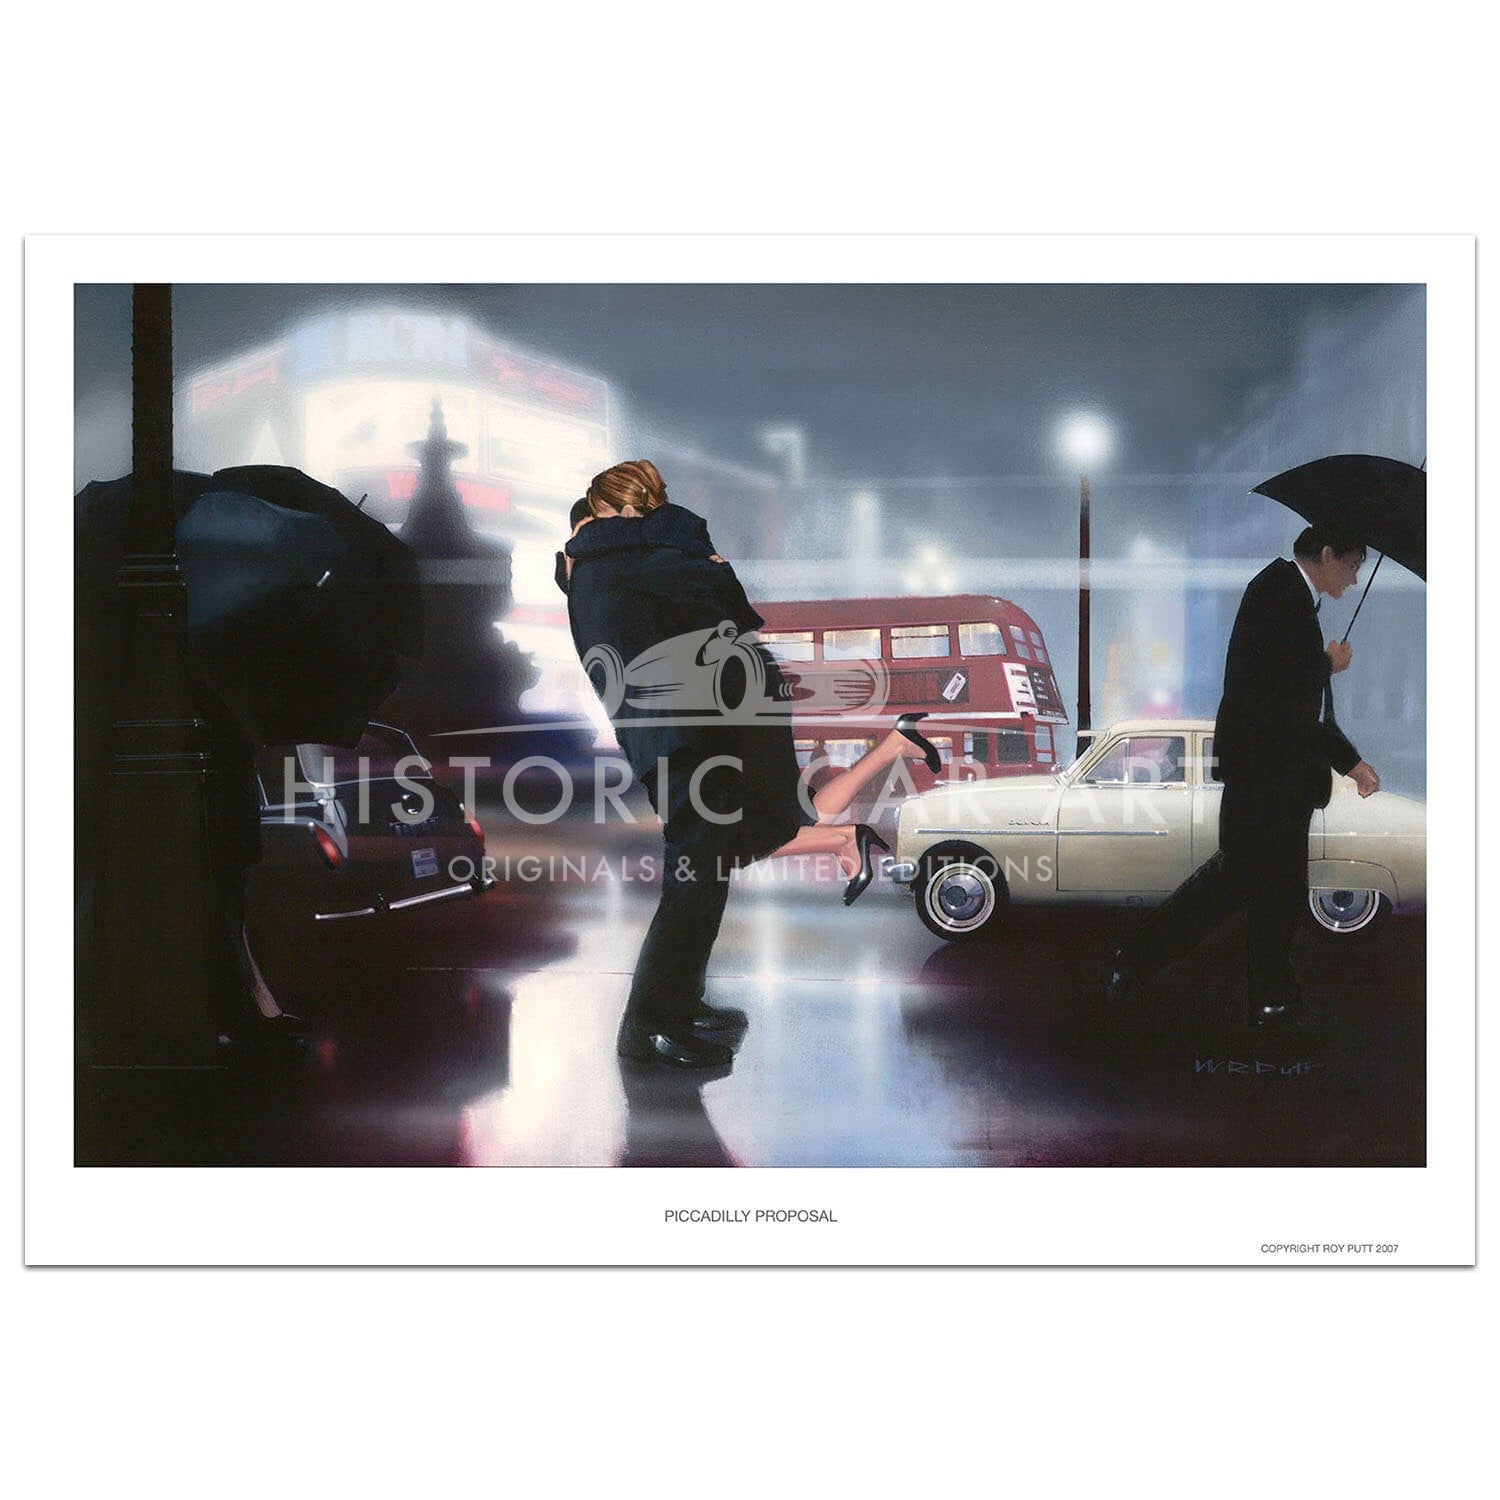 Piccadilly Proposal - Piccadilly Circus London | 1959 | Art Print